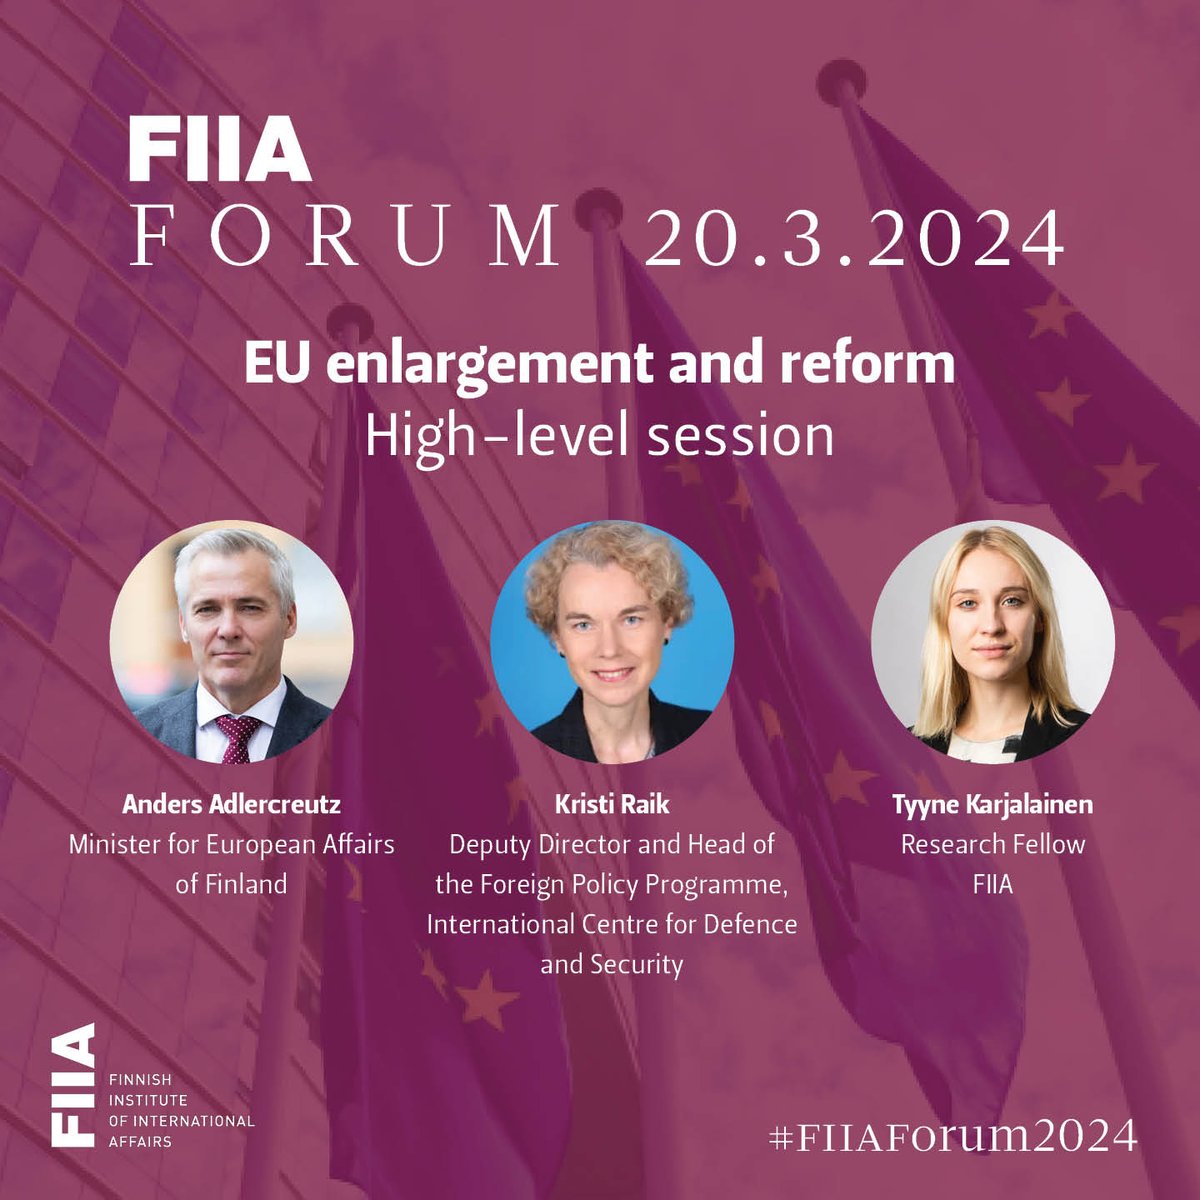 One week to go until #FIIAForum2024: The European Union in a year of change! ⌛️ In the final session, @TyyneKarjalain will discuss #EUenlargement and reform with 🇫🇮 Minister for European Affairs @adleande and @ICDS_Tallinn Deputy Director @KristiRaik. 🔗 fiia.fi/en/event/fiia-…